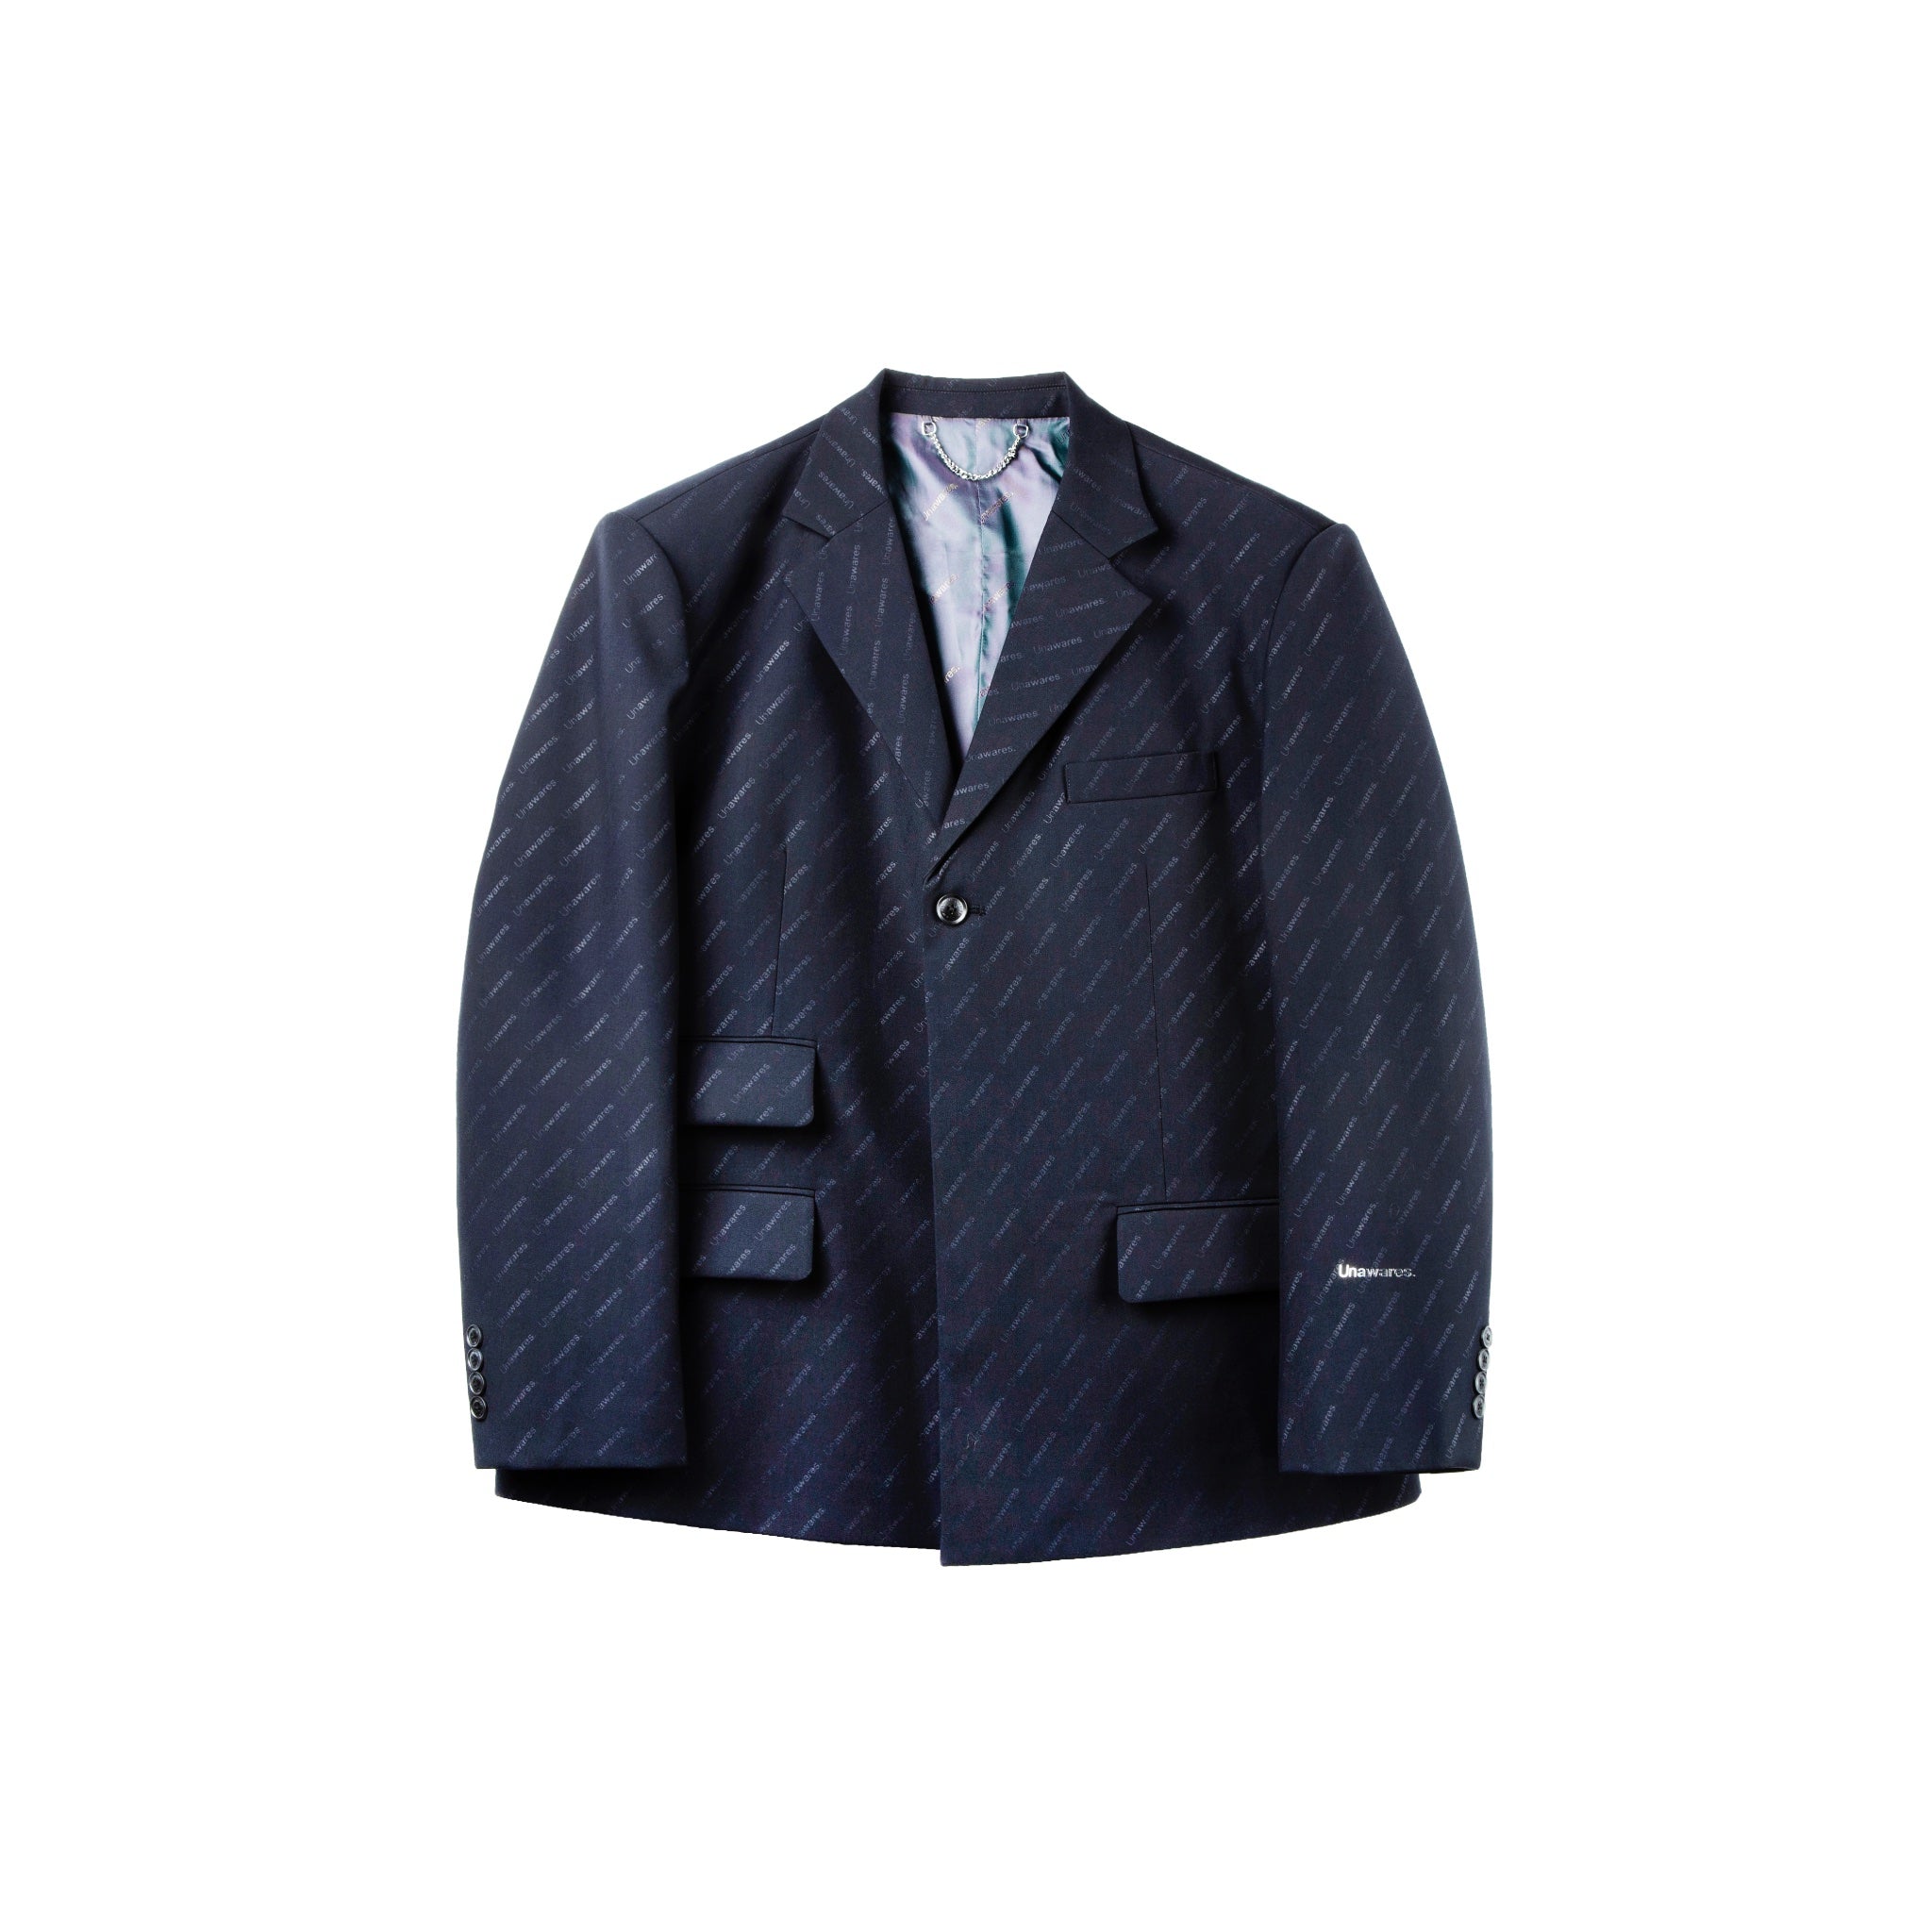 UNAWARES Brand Monogram Single Breasted Suit | MADA IN CHINA